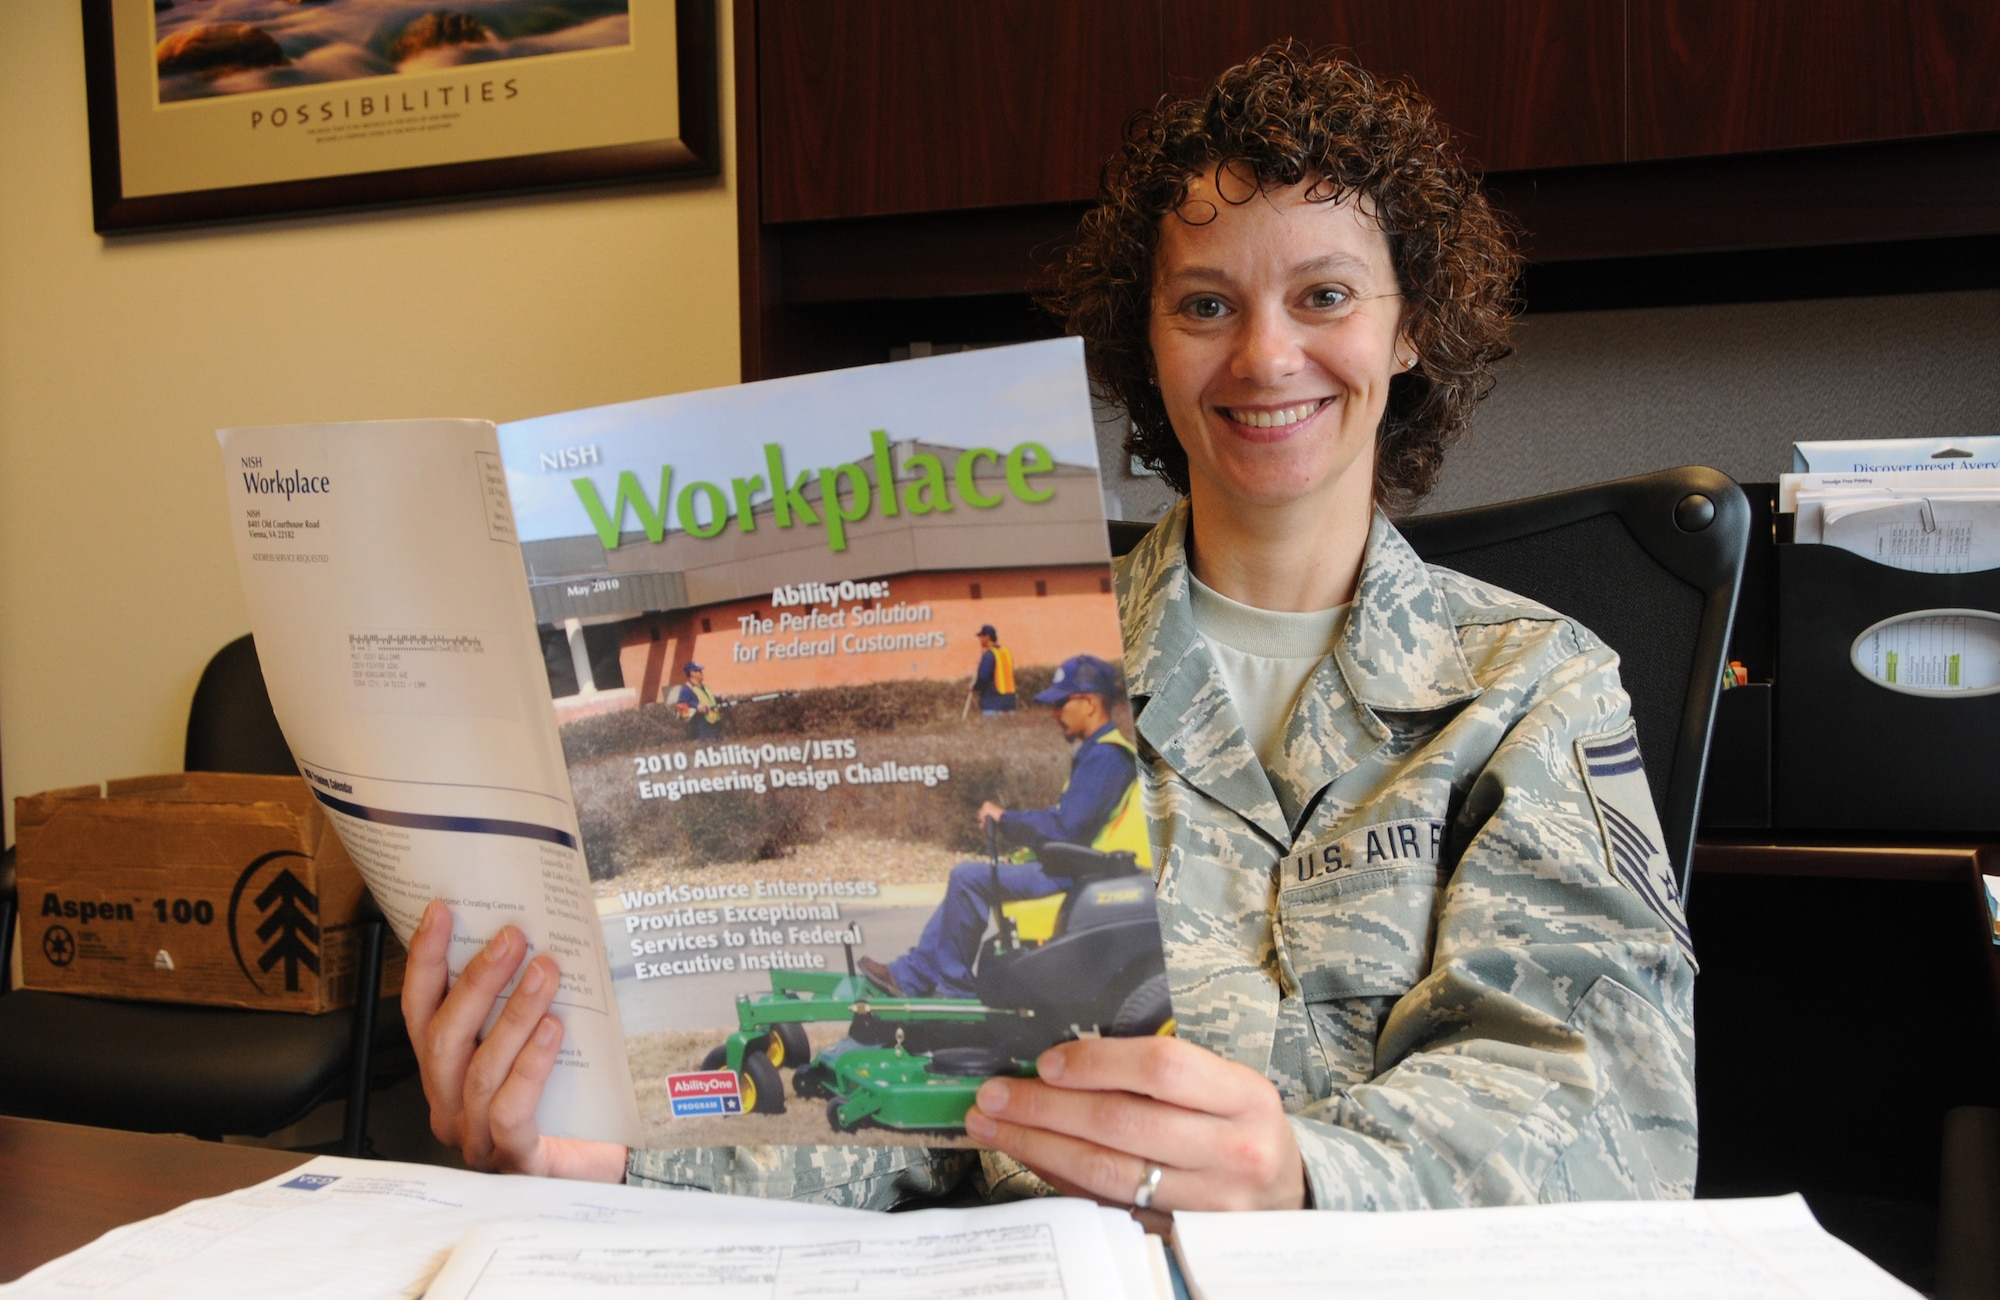 Senior Master Sgt Vicky Williams reads “Workplace” magazine while at the 185th Air Refueling Wing (ARW). Williams works as the Base Contracting Officer at the Iowa Air National Guard’s 185th ARW in Sioux City, Iowa.

USAF Photo: Master Sgt. Vincent De Groot 185ARW Public Affairs
